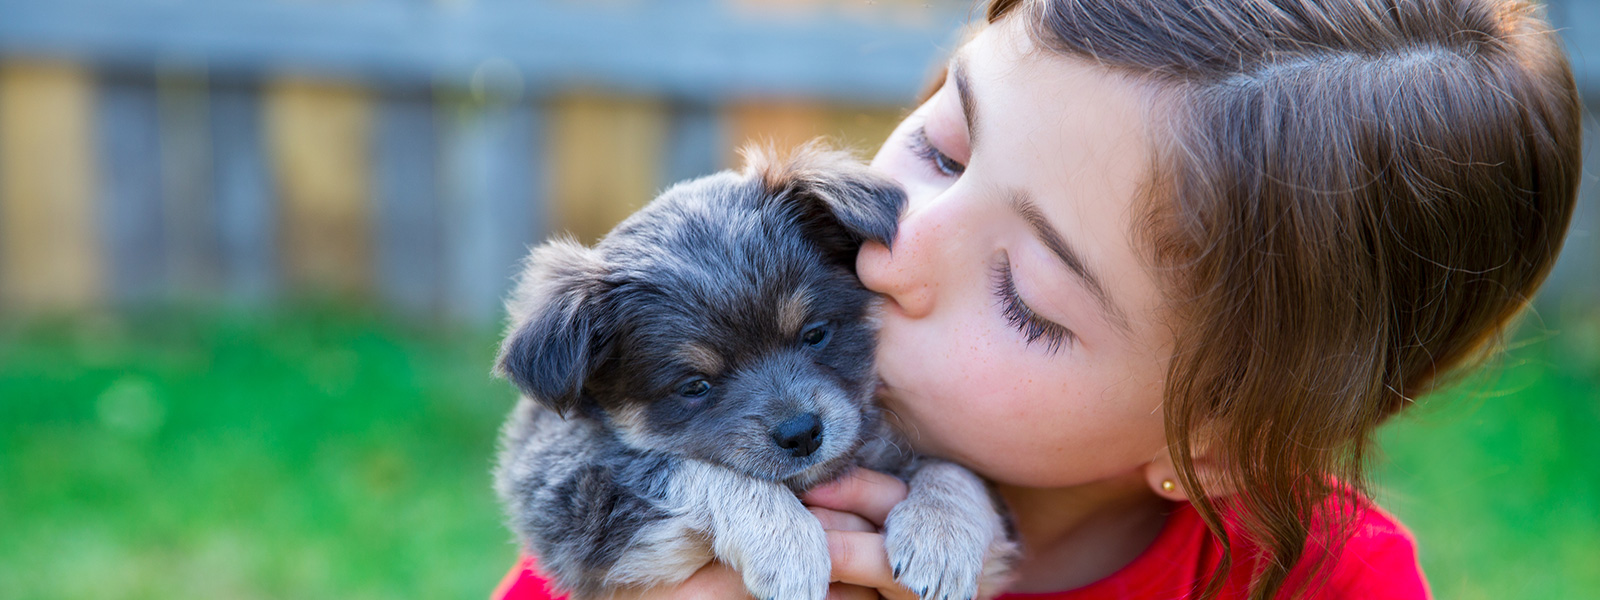 The Vets on Balwyn Guide to Caring for a New Puppy